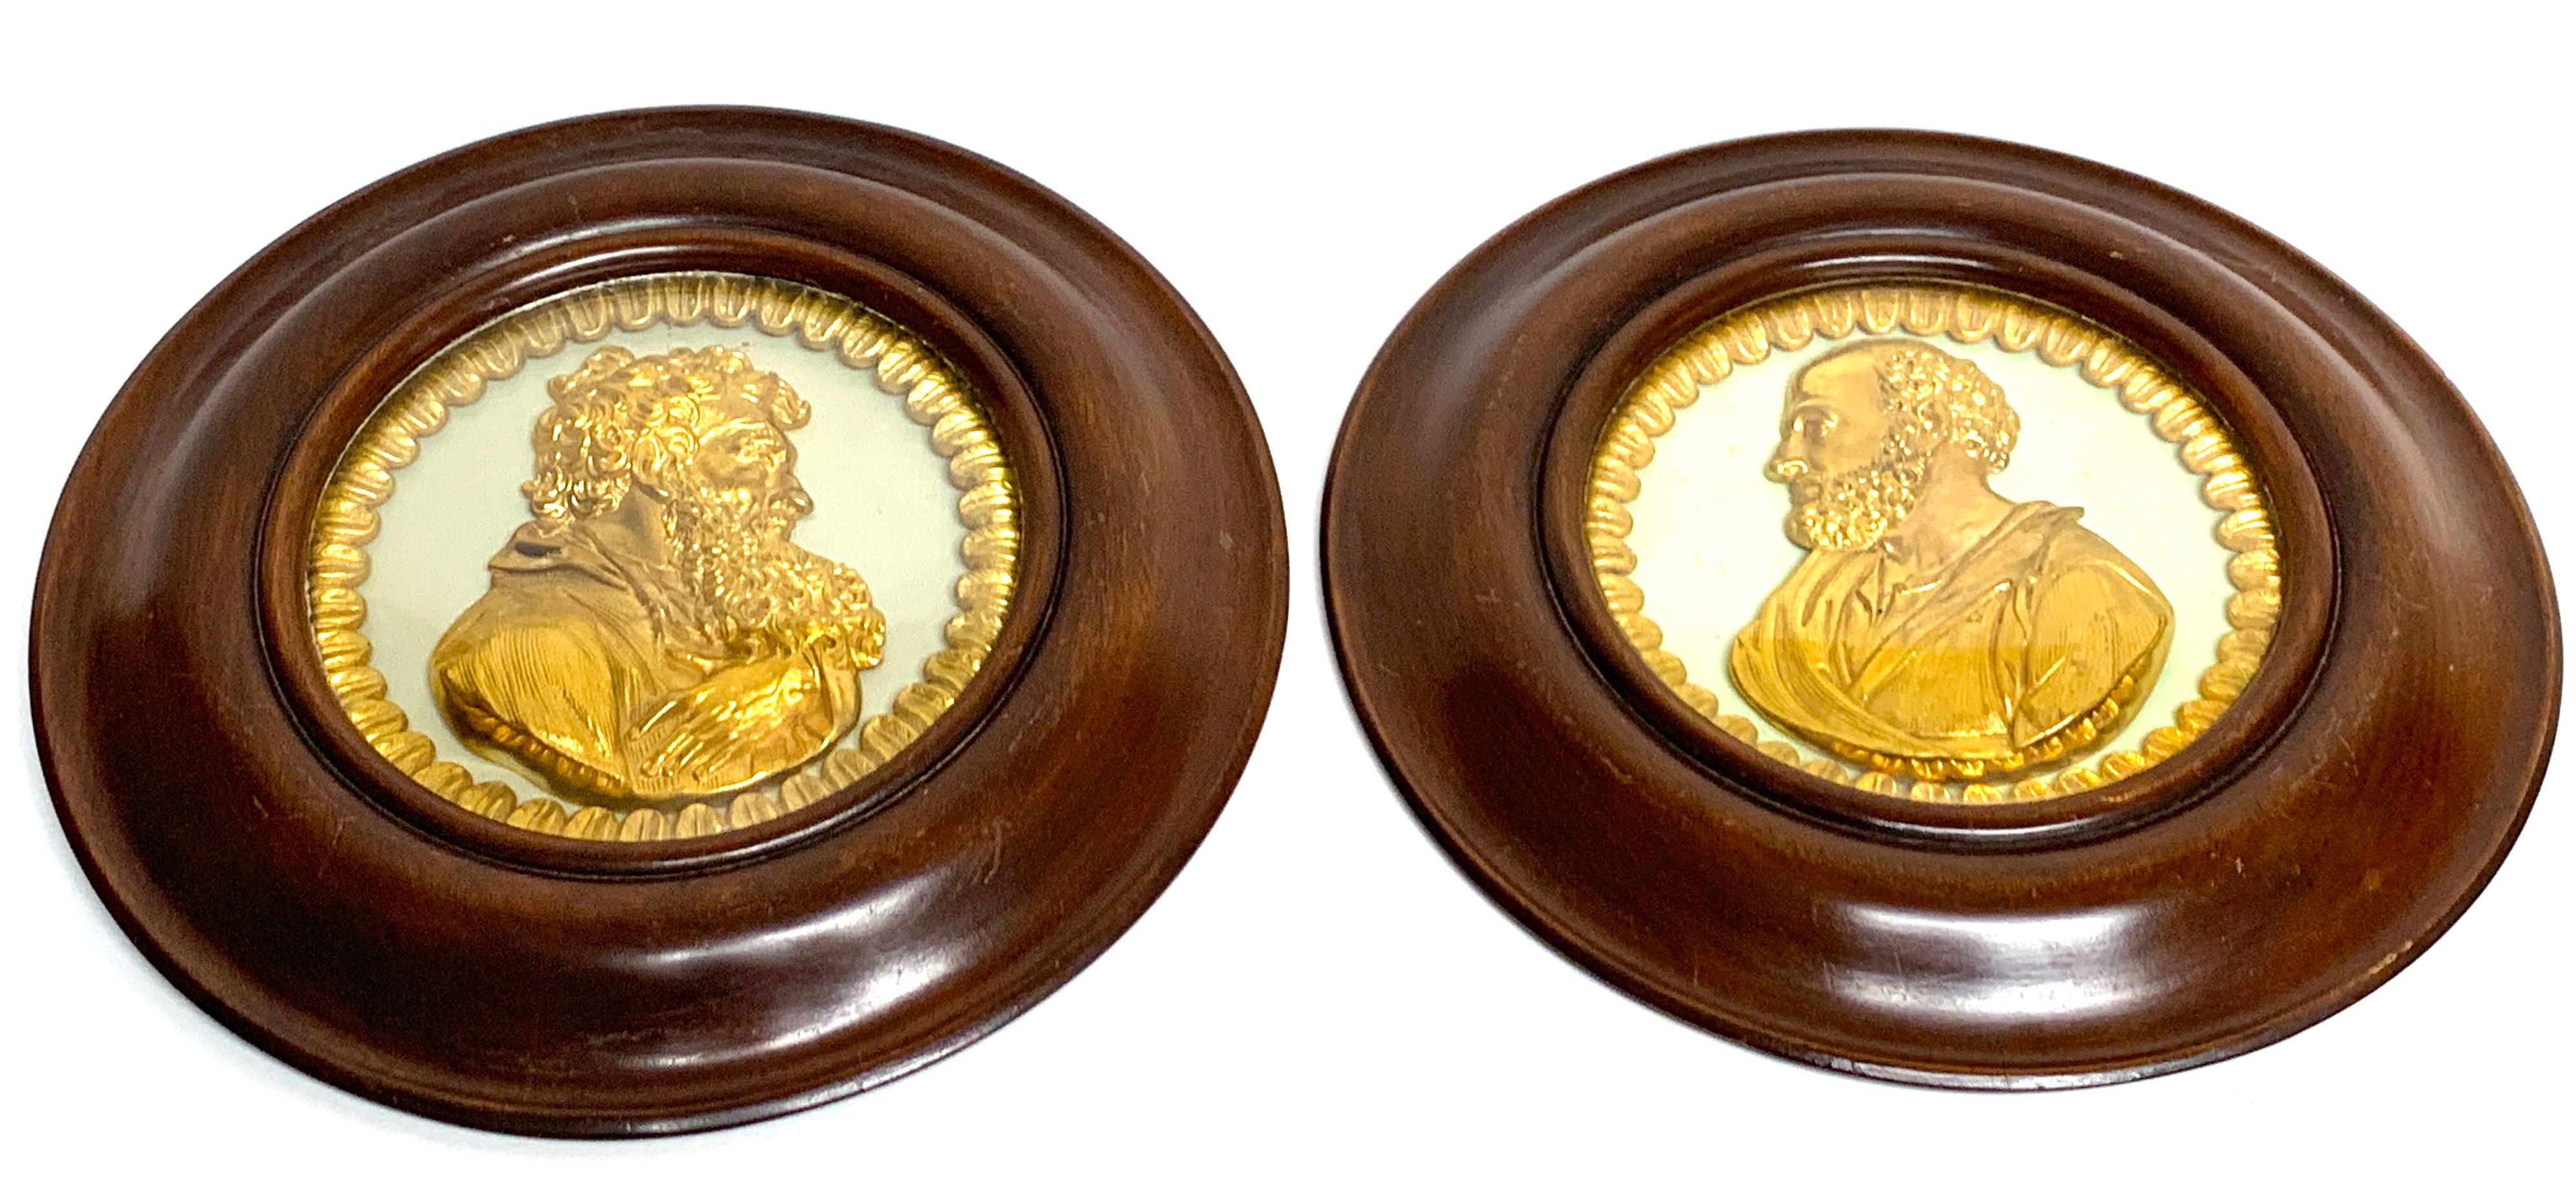 Pair of English Regency framed ormolu portrait plaques of St. Paul & Socrates
Exceptional quality and casting, beautifully framed with convex glass.
Each plaque is mounted in a circular hardwood frame with a gadrooned border and convex glass, The